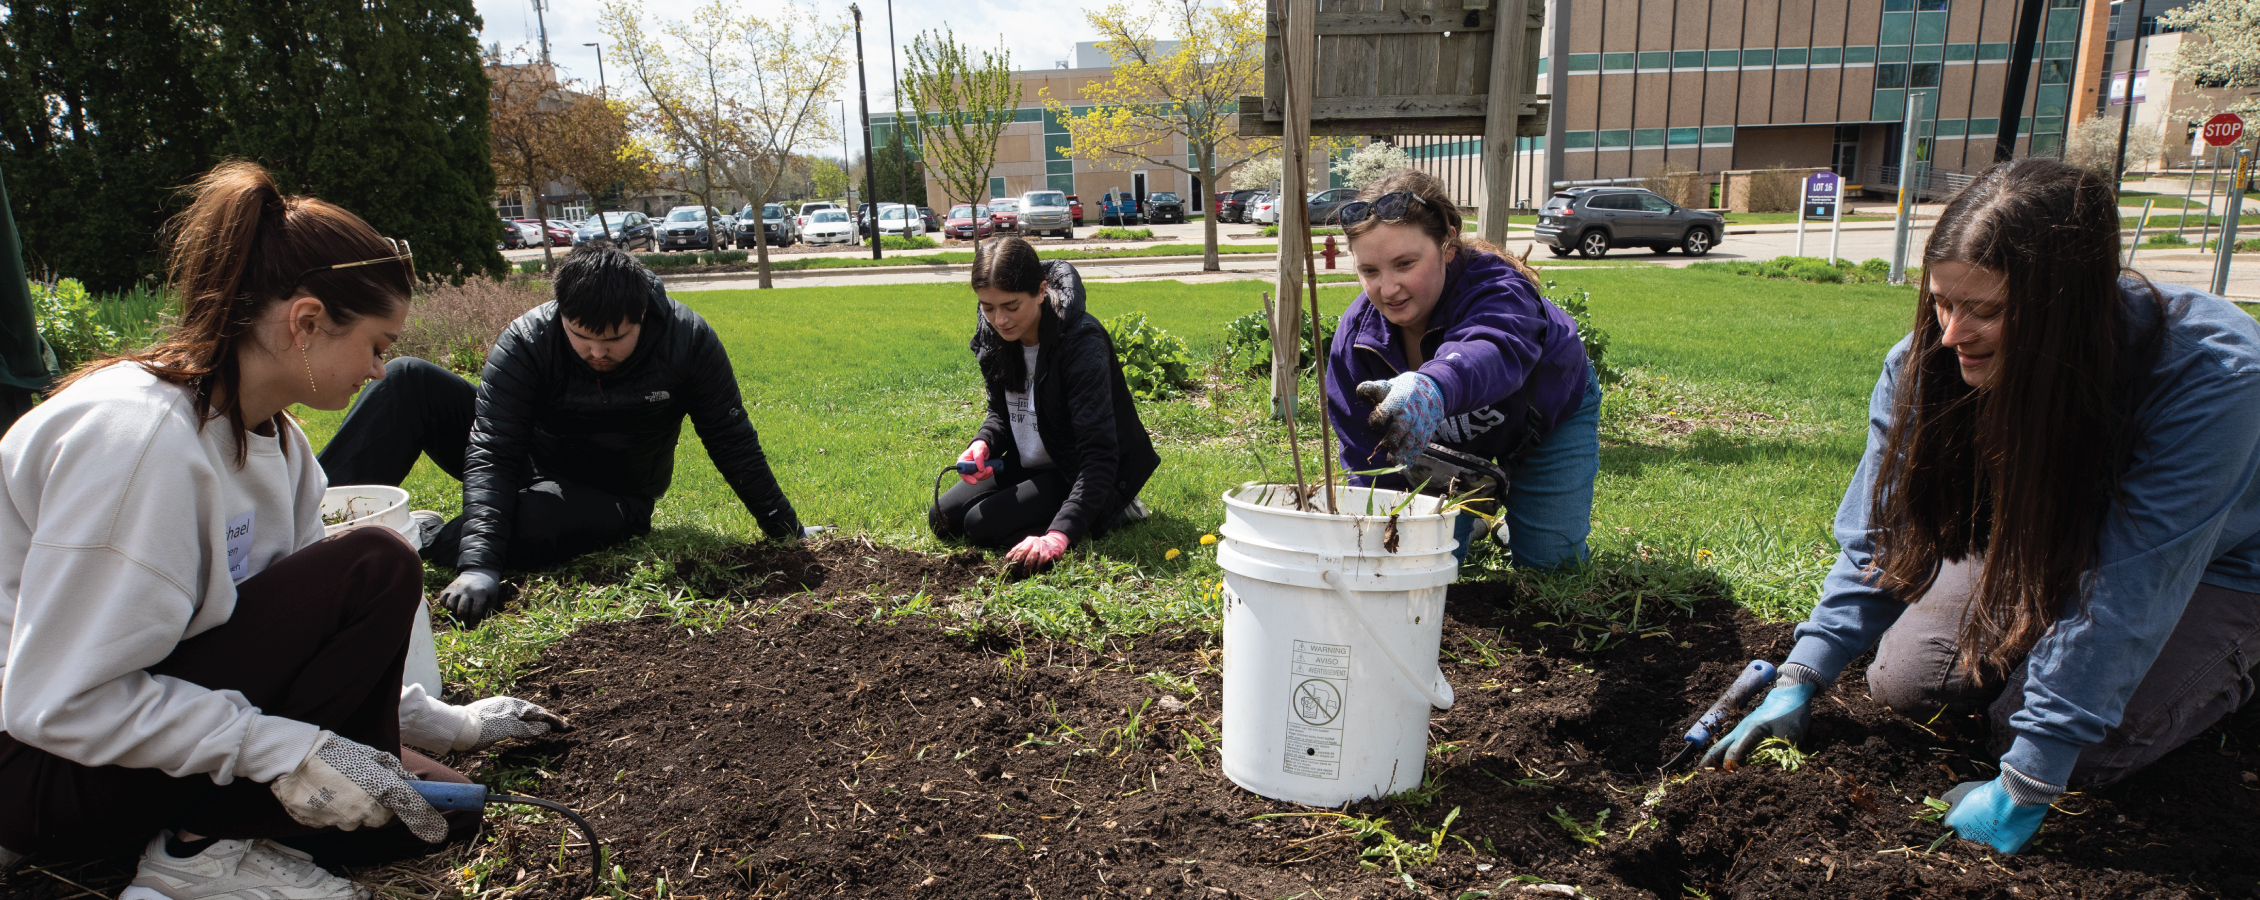 UW-Whitewater students serving the Whitewater community